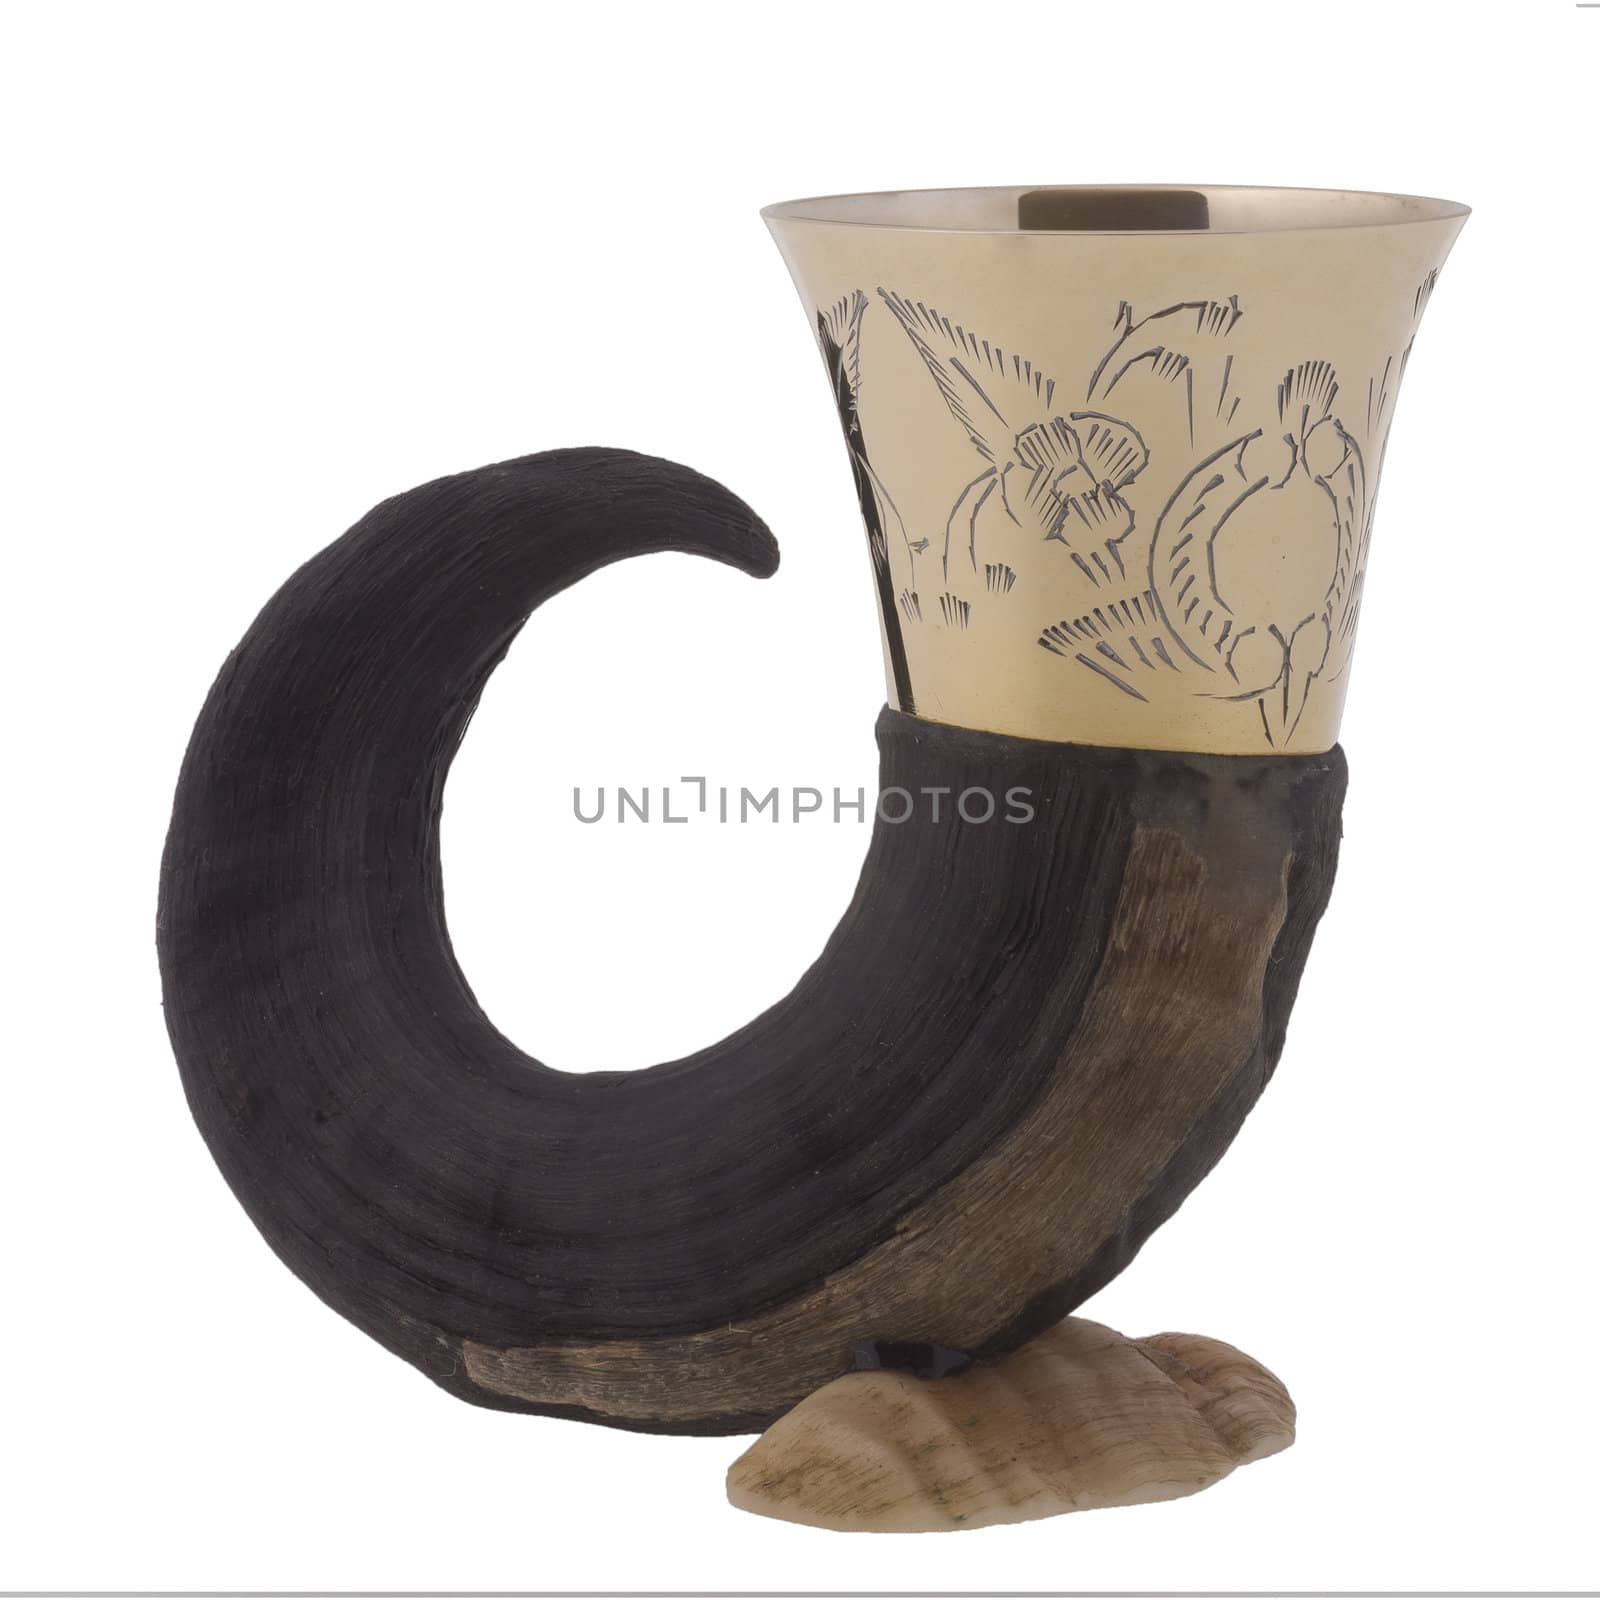 Drinking horn with brass accents by jogvan